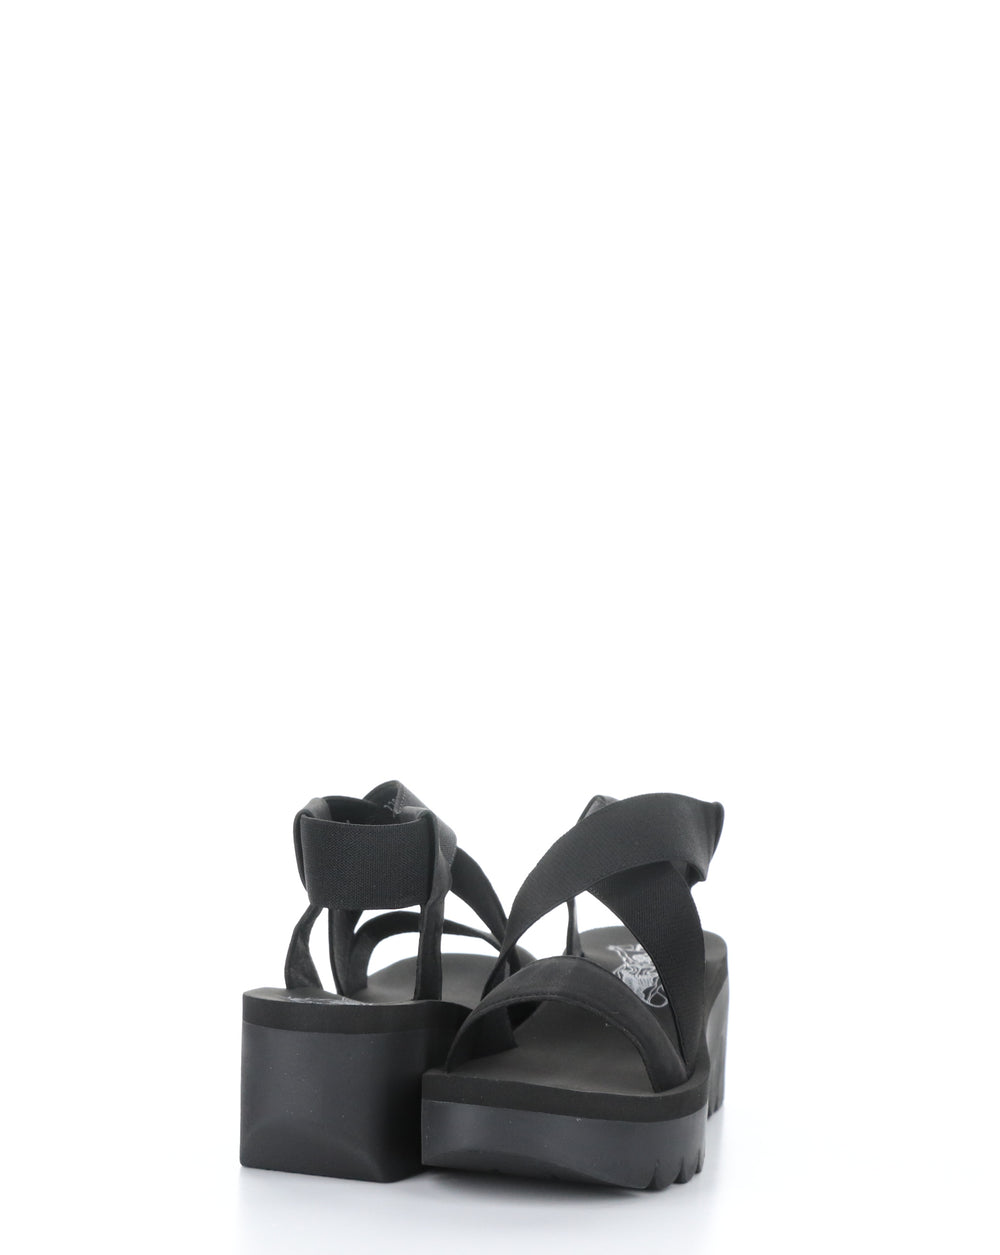 YABY922FLY 000 BLACK Elasticated Sandals